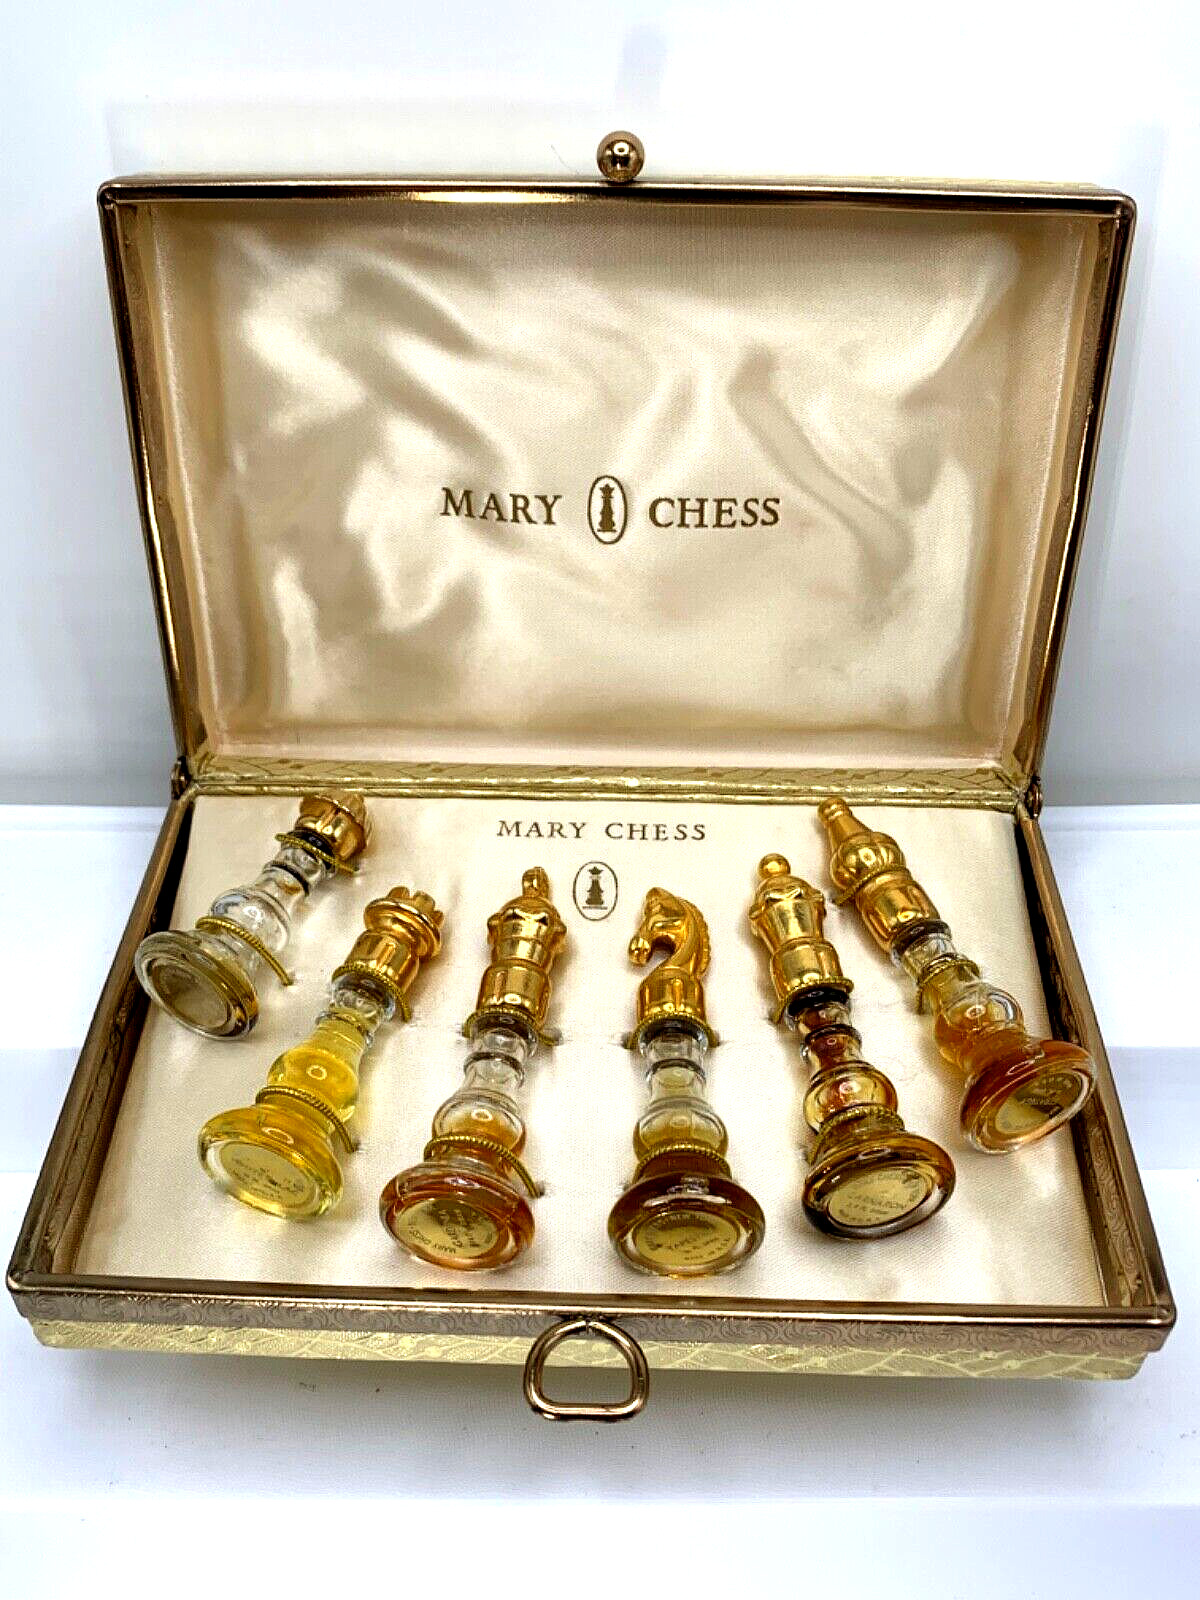 Deluxe VTG perfume bottle set/box. Six scents chess set, by Mary Chess.  1960s.